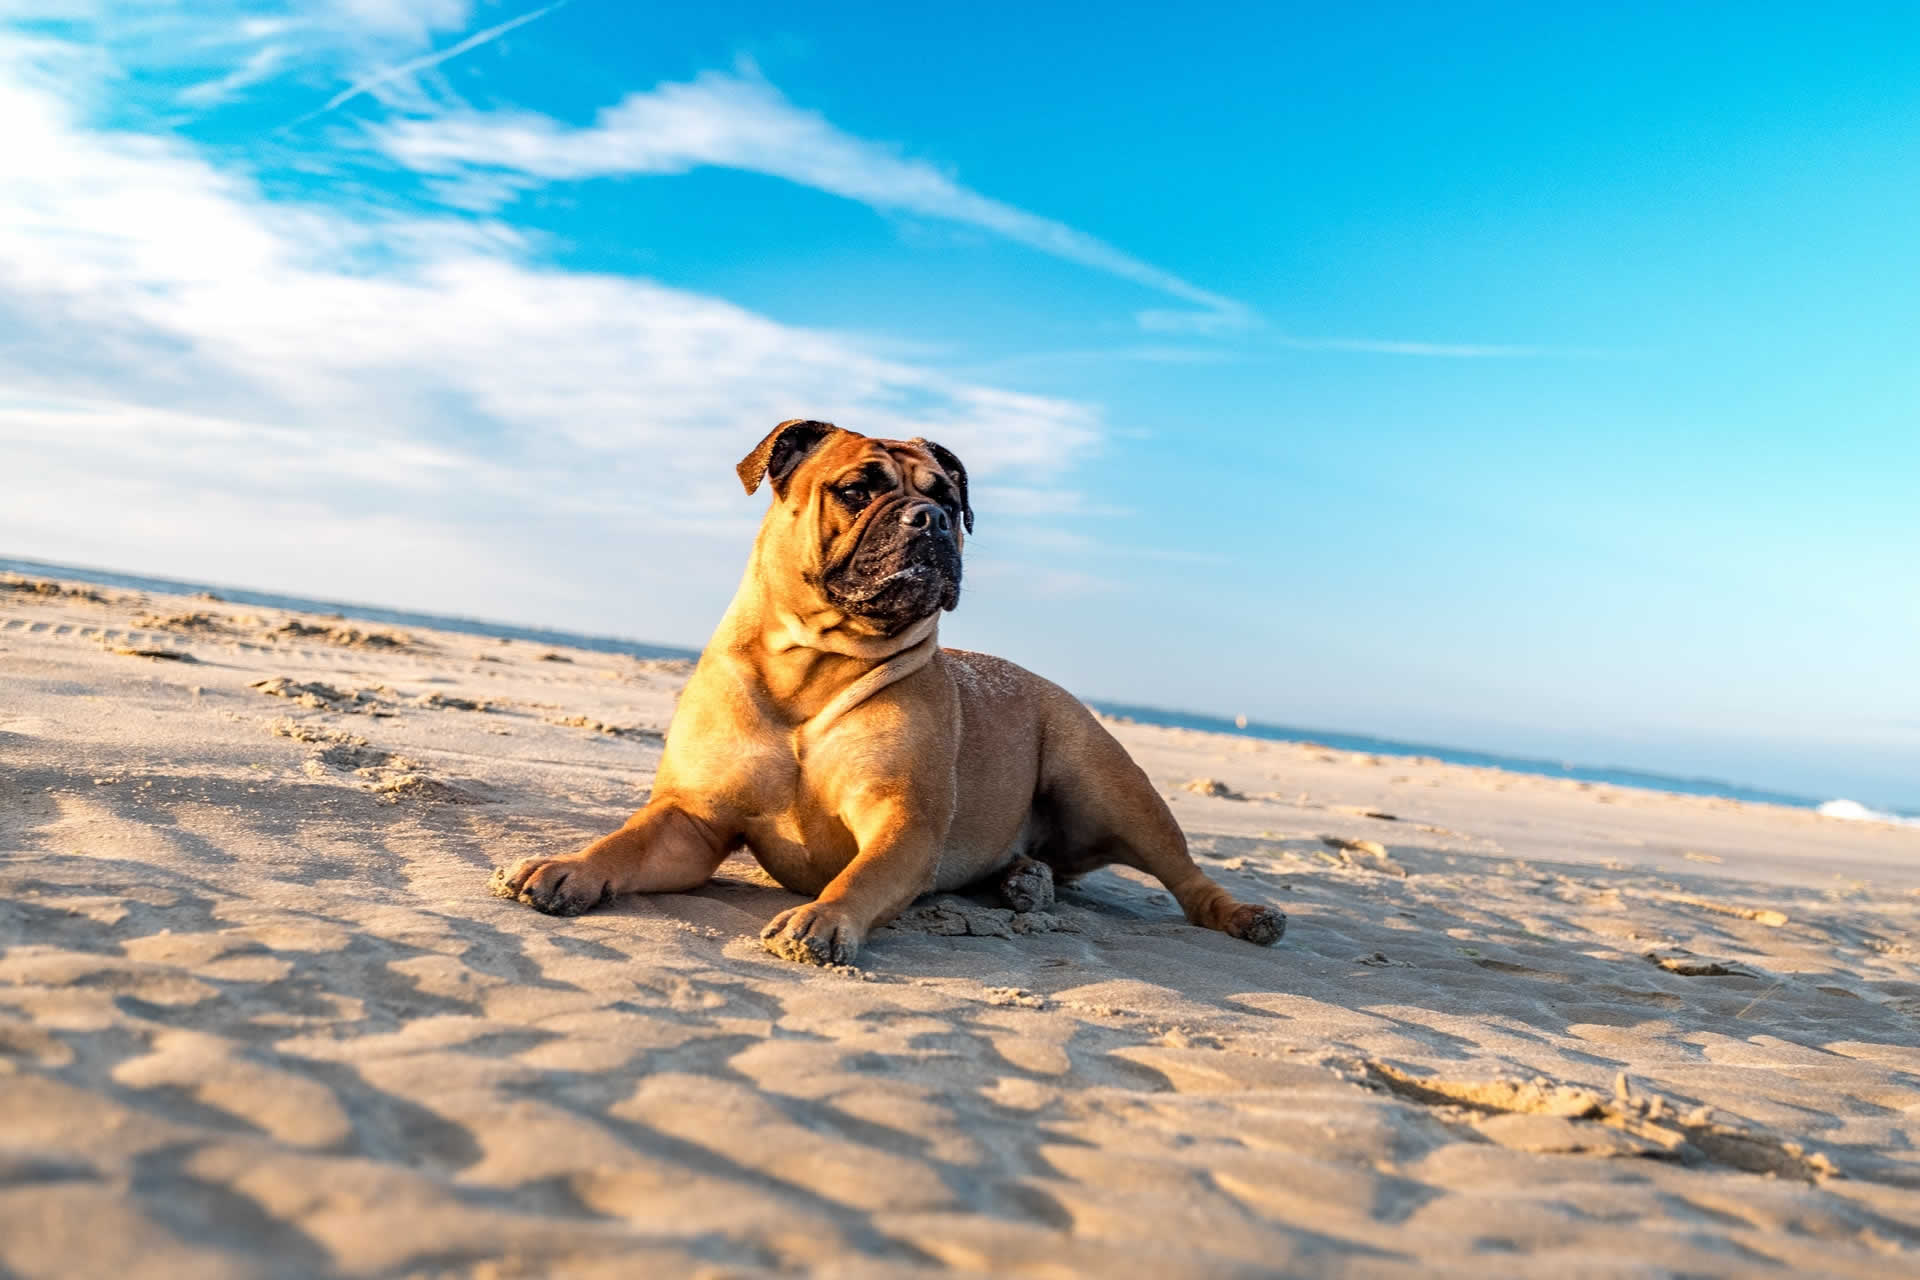 A brown dog sitting on the beach with a blue sky.